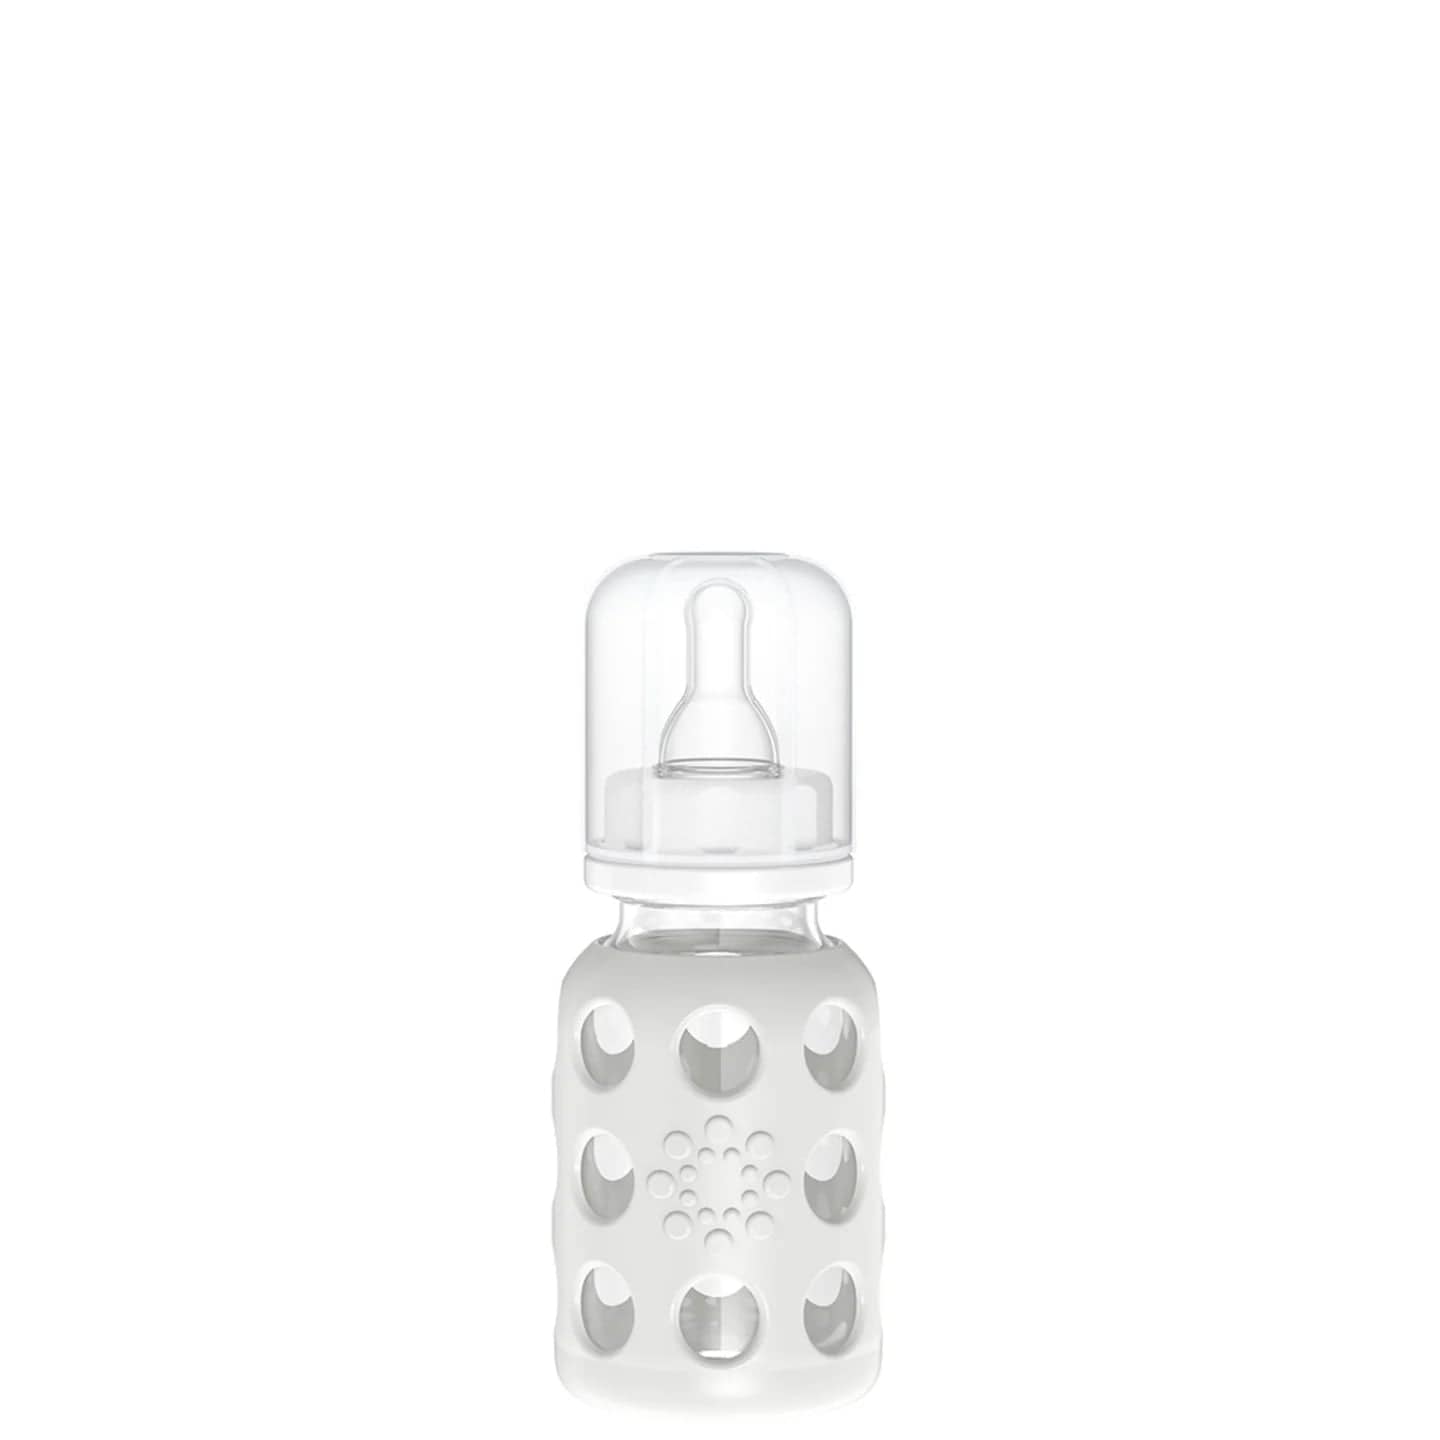 Lifefactory Soother (Stone Grey) Lifefactory 4oz Glass Baby Bottle - Stage 1 Nipple, Stopper, and Cap (Stone Grey)